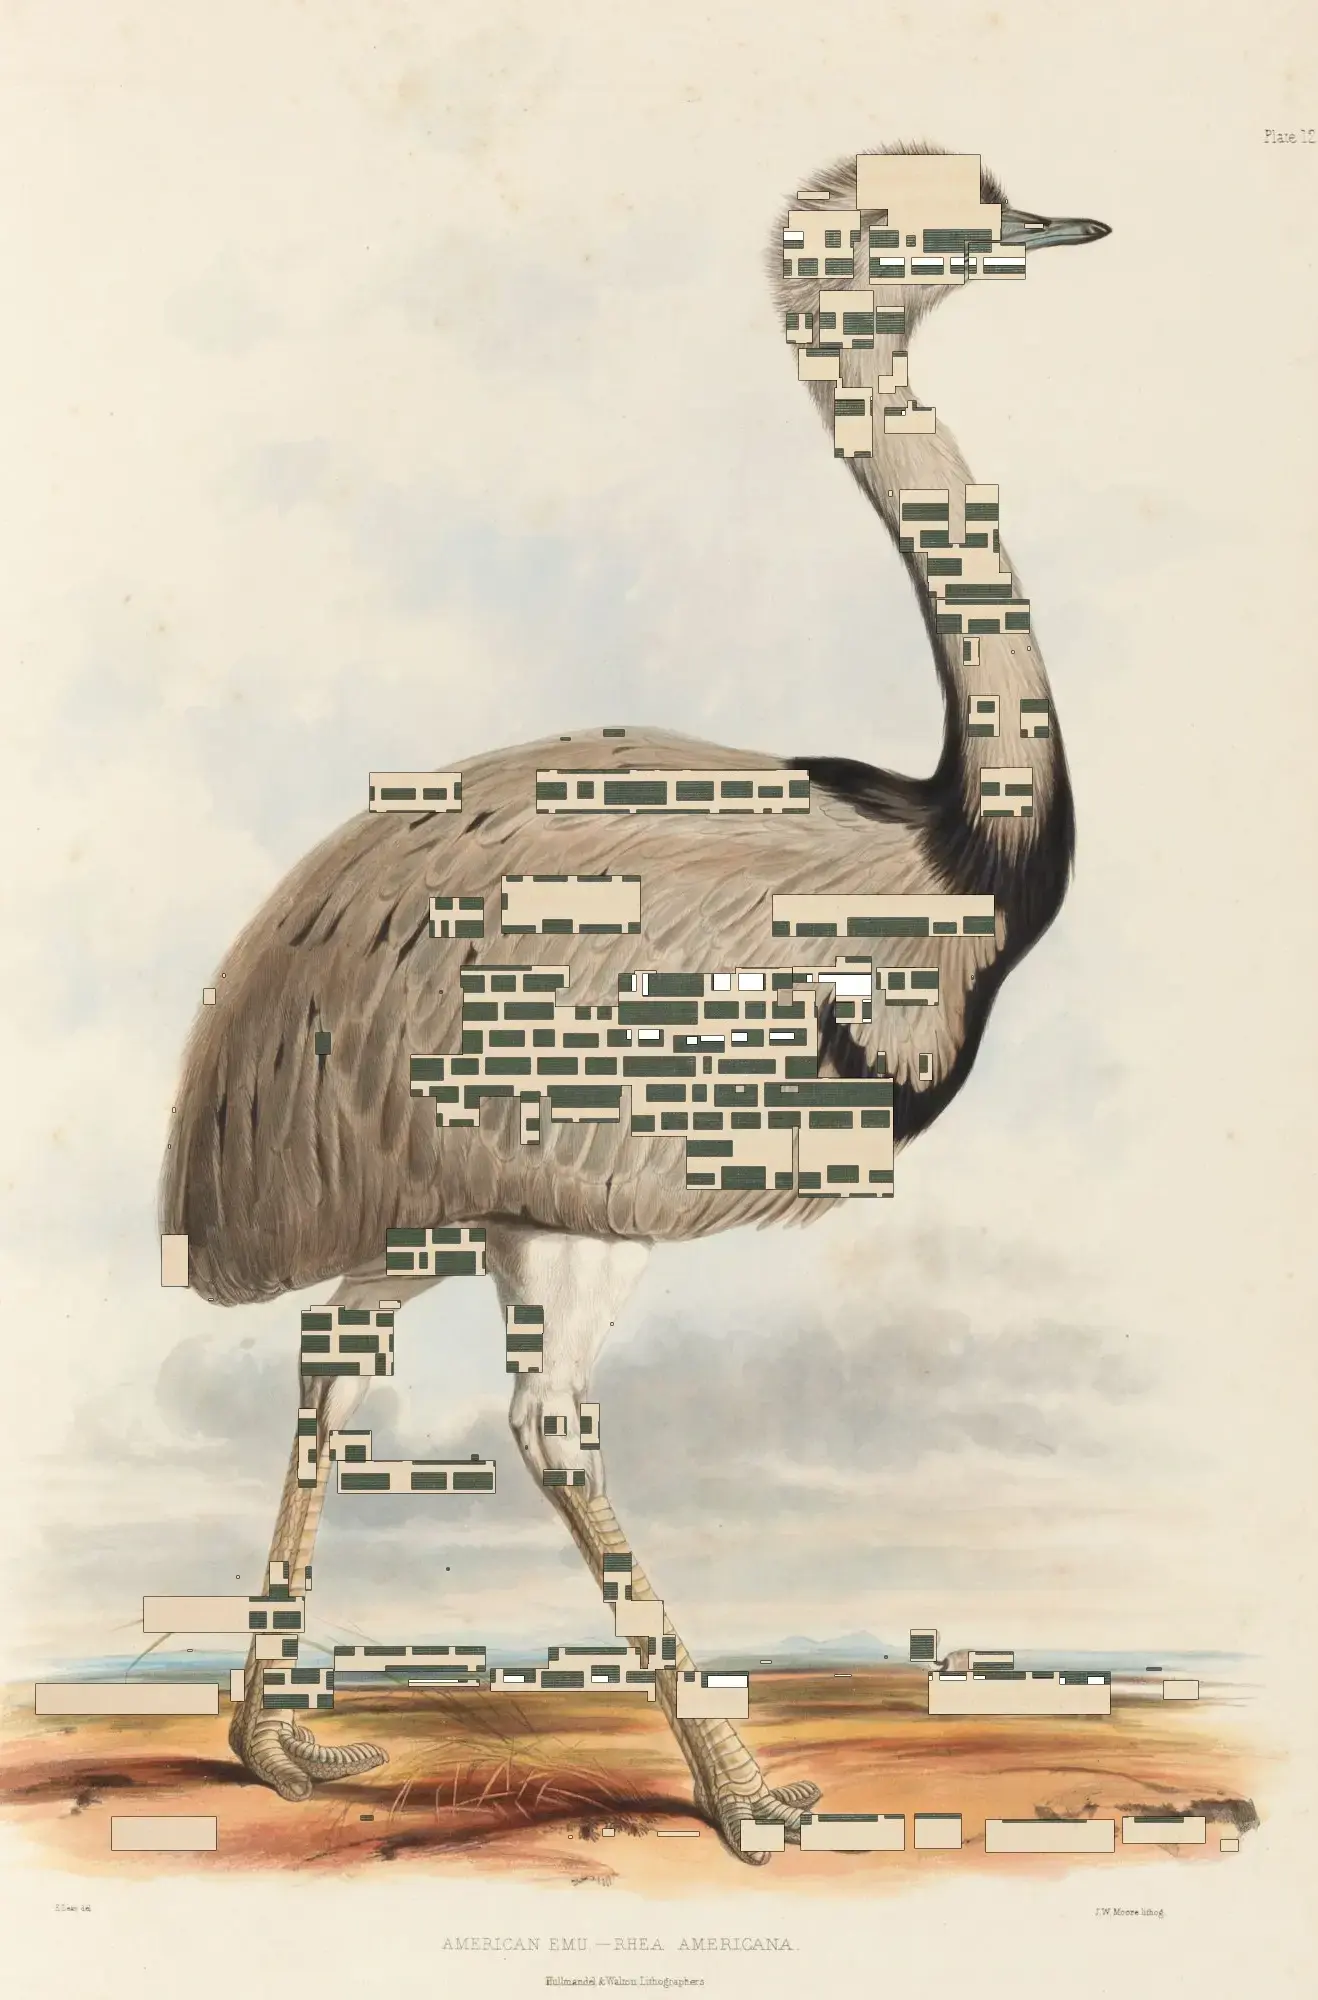 An illustration of a flightless bird with words cut out of the image